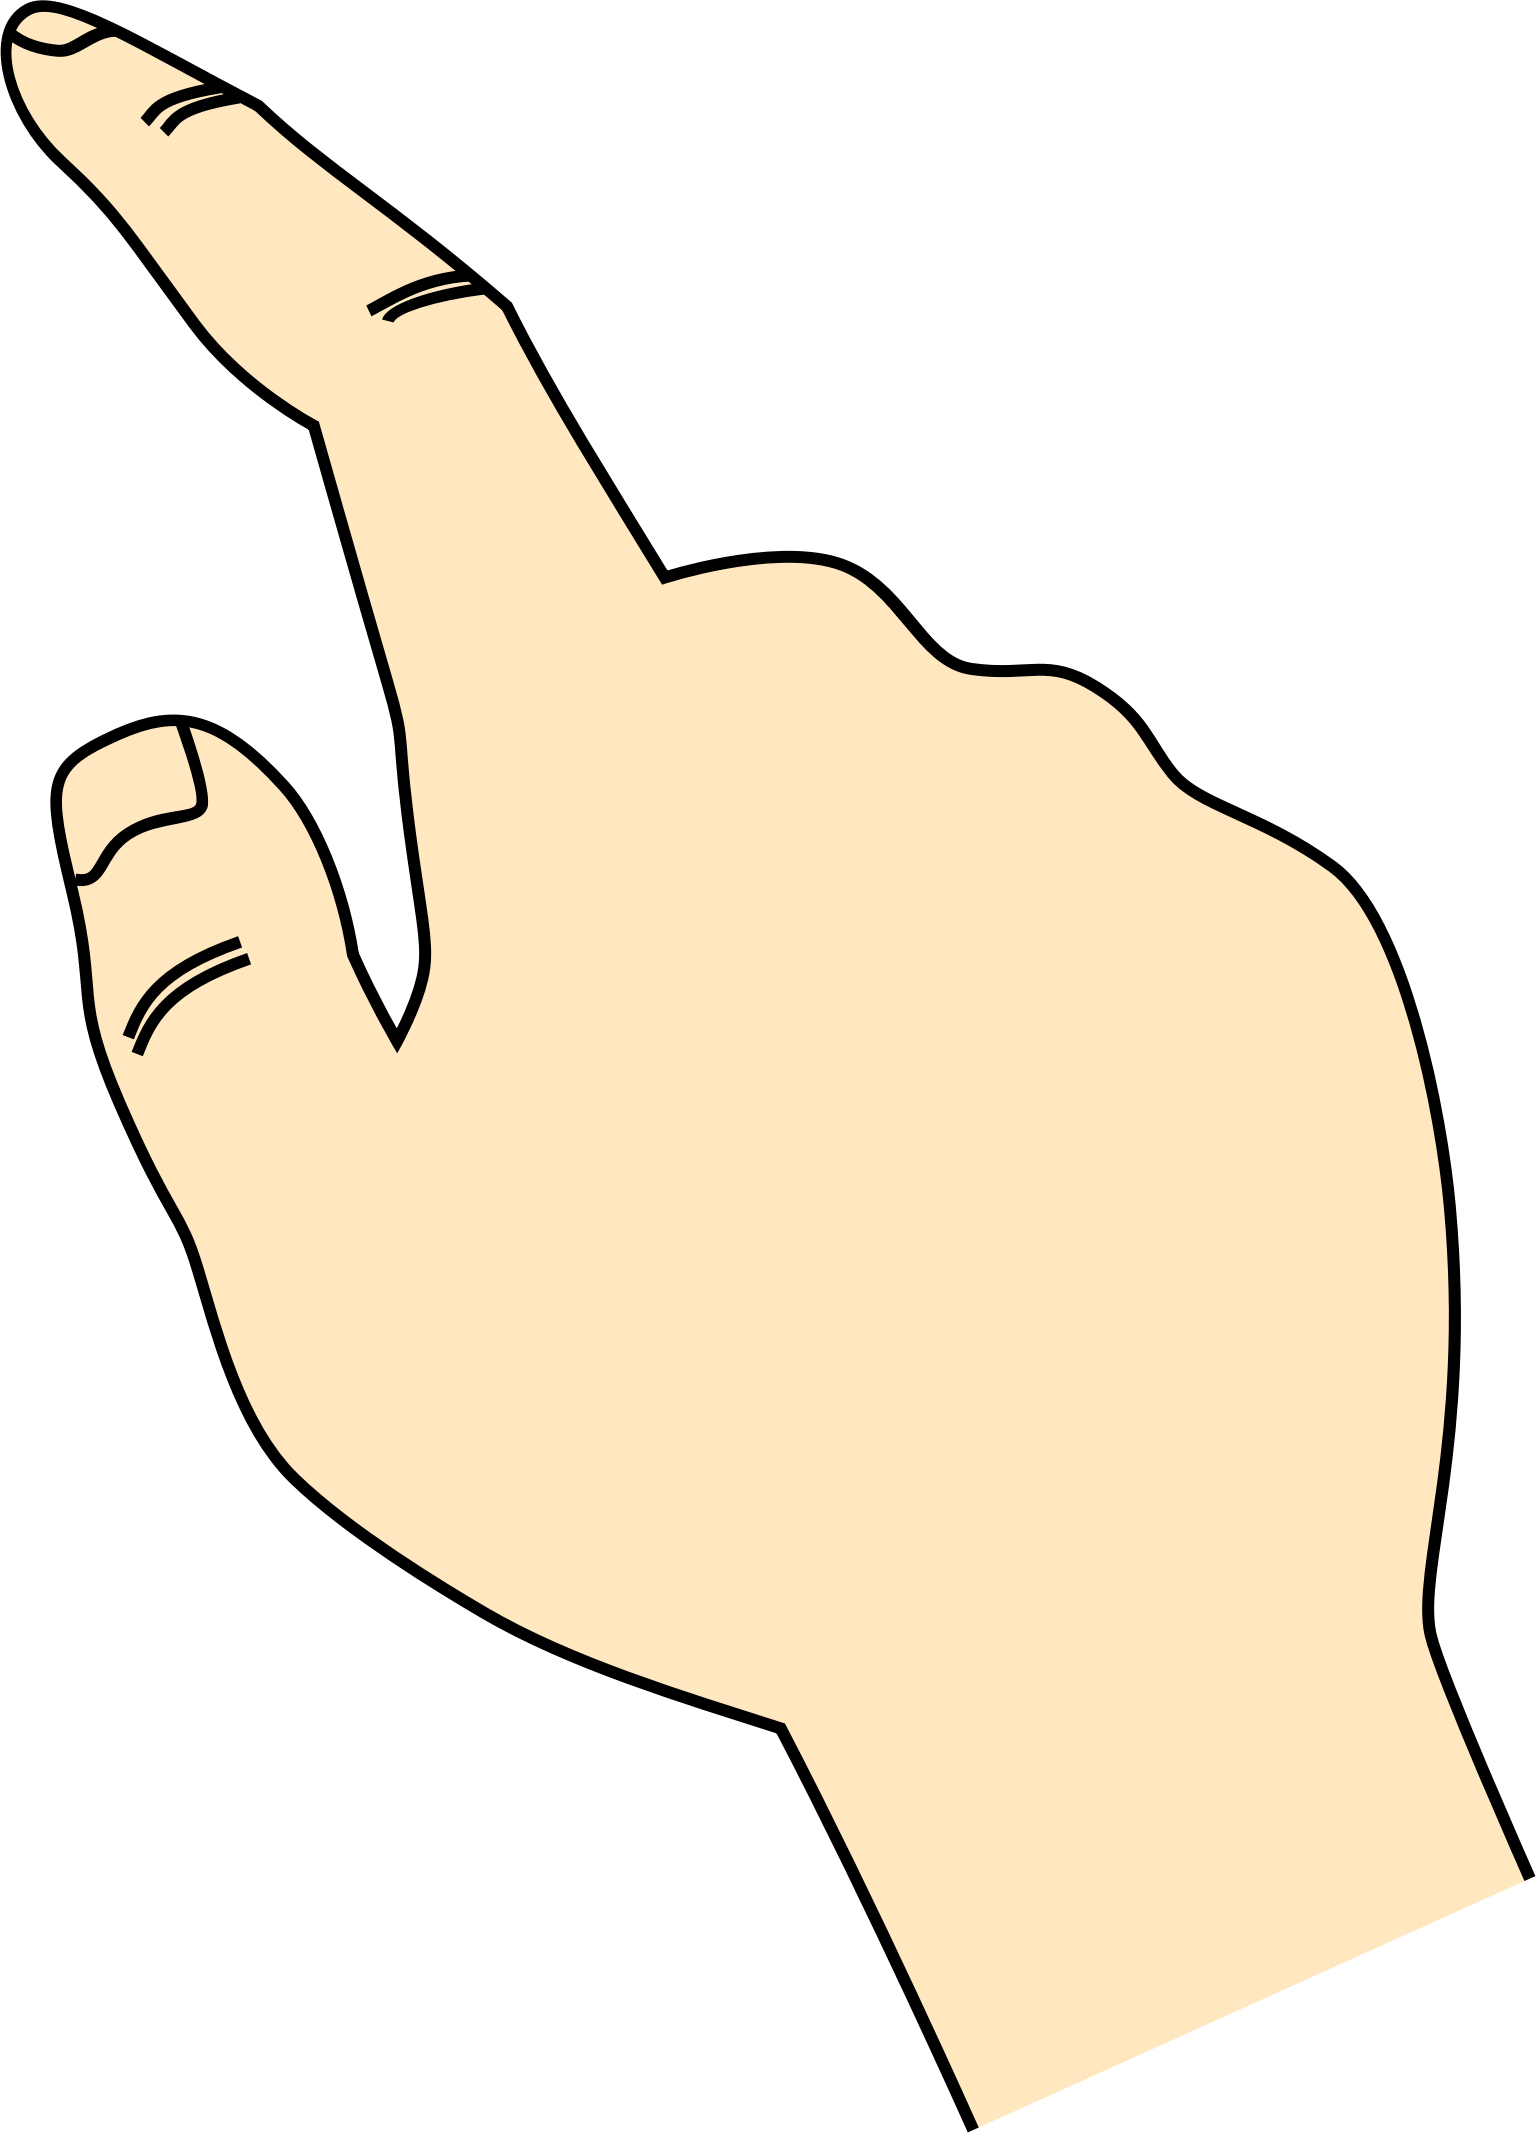 605 Pointing Finger free clipart.